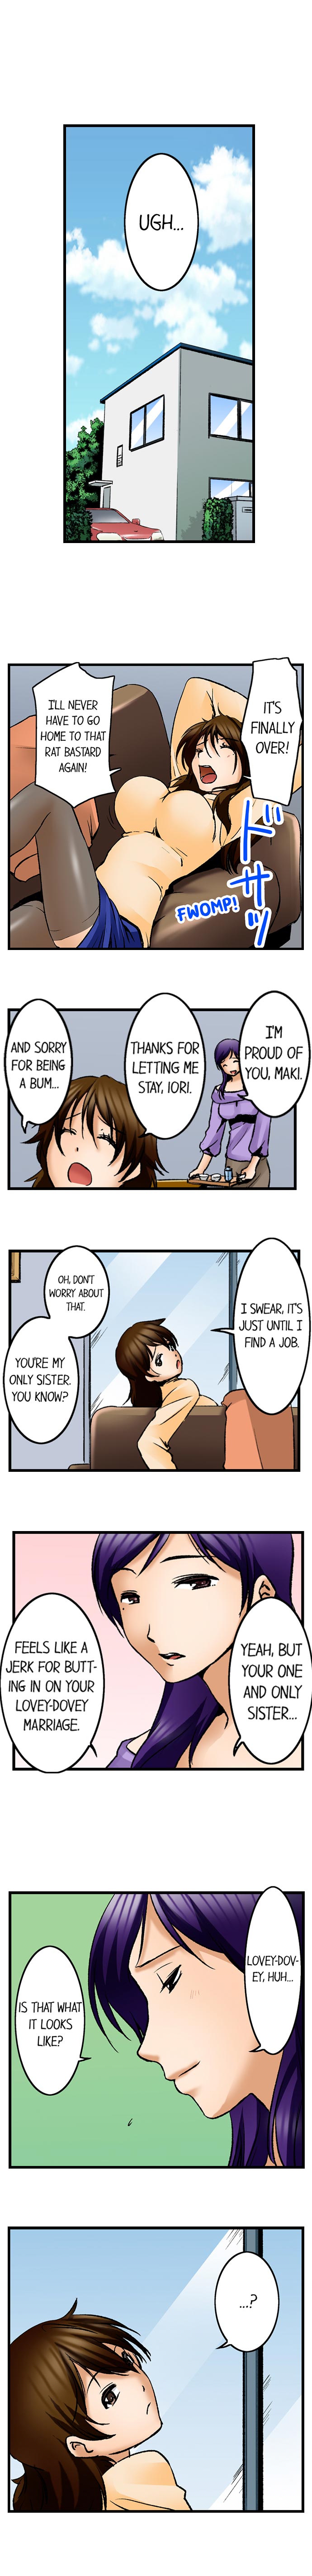 Turned On By My Nephew - Chapter 1 Page 4